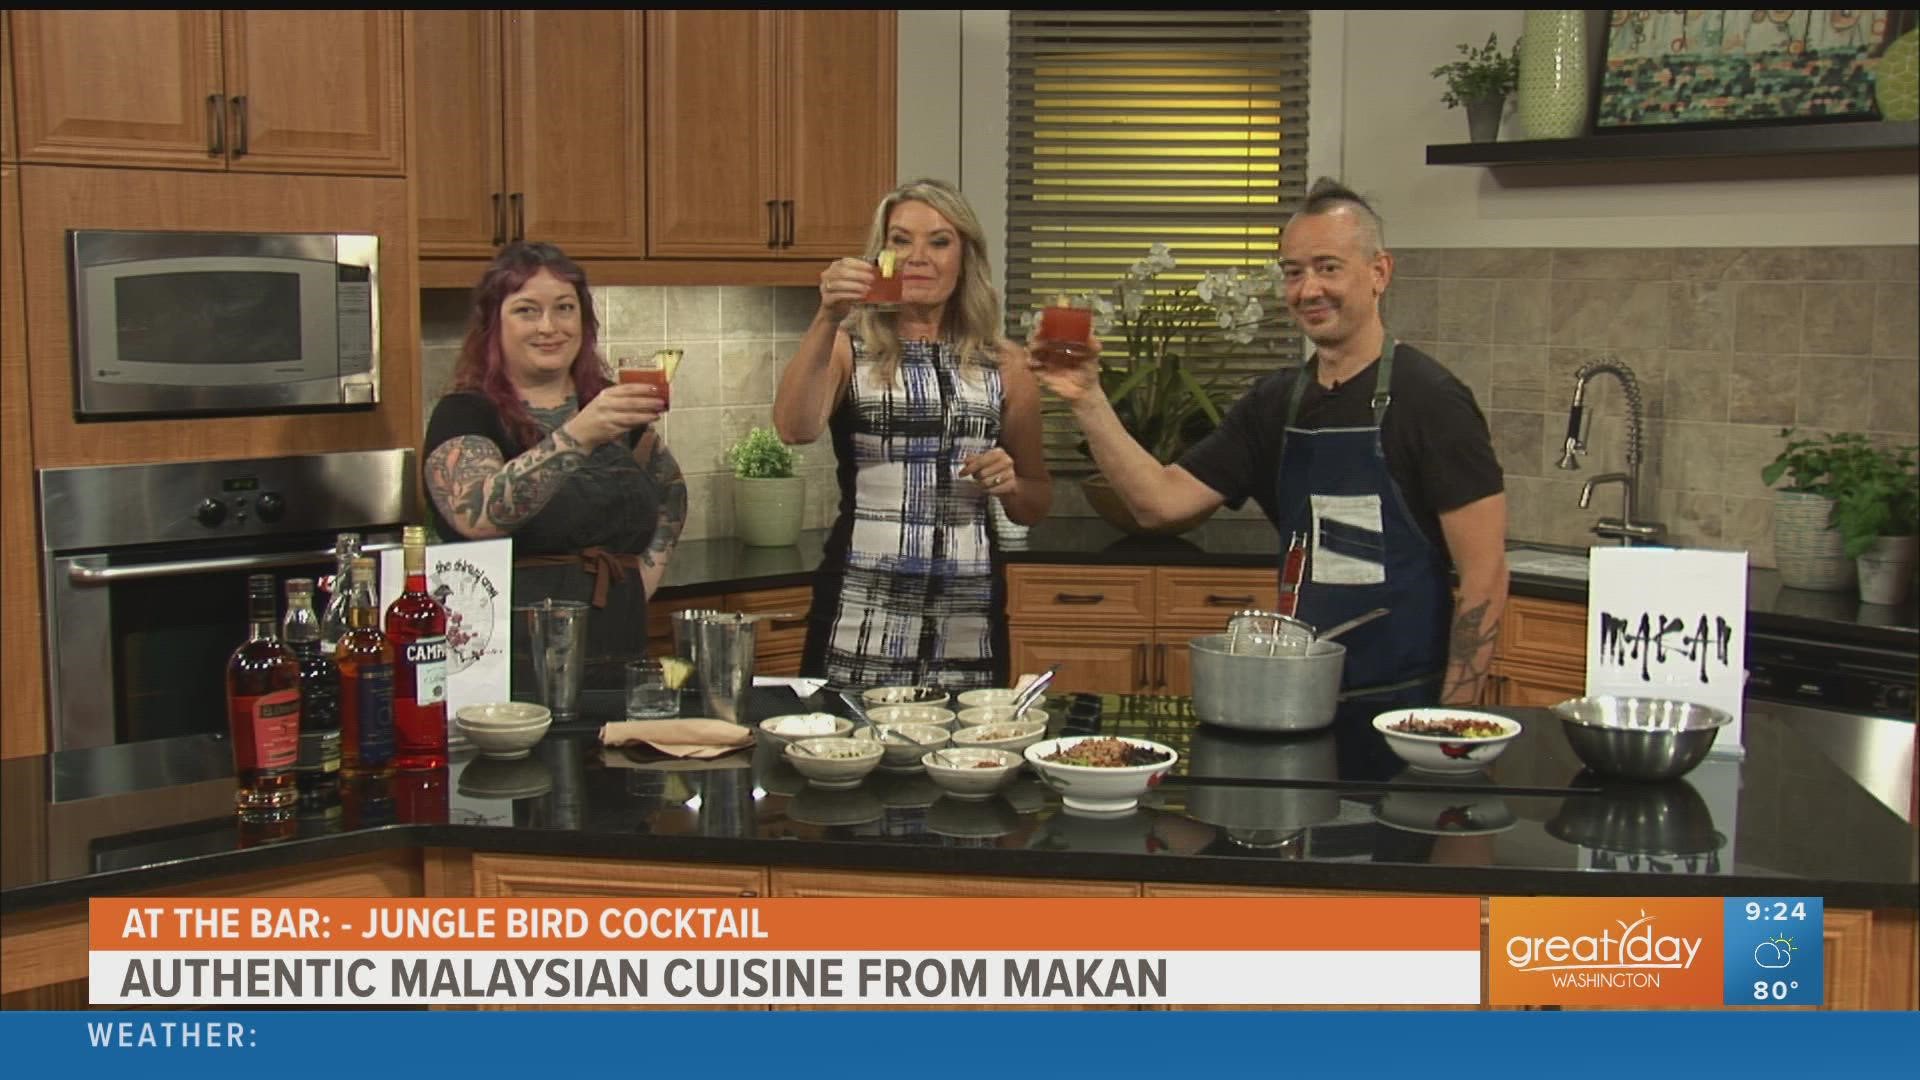 Chef James Wozniuk and Suzy Critchlow give Kristen taste and sip of top Malaysian menu items from Makan in Columbia Heights. Check them out at 3400 11th Street, NW.